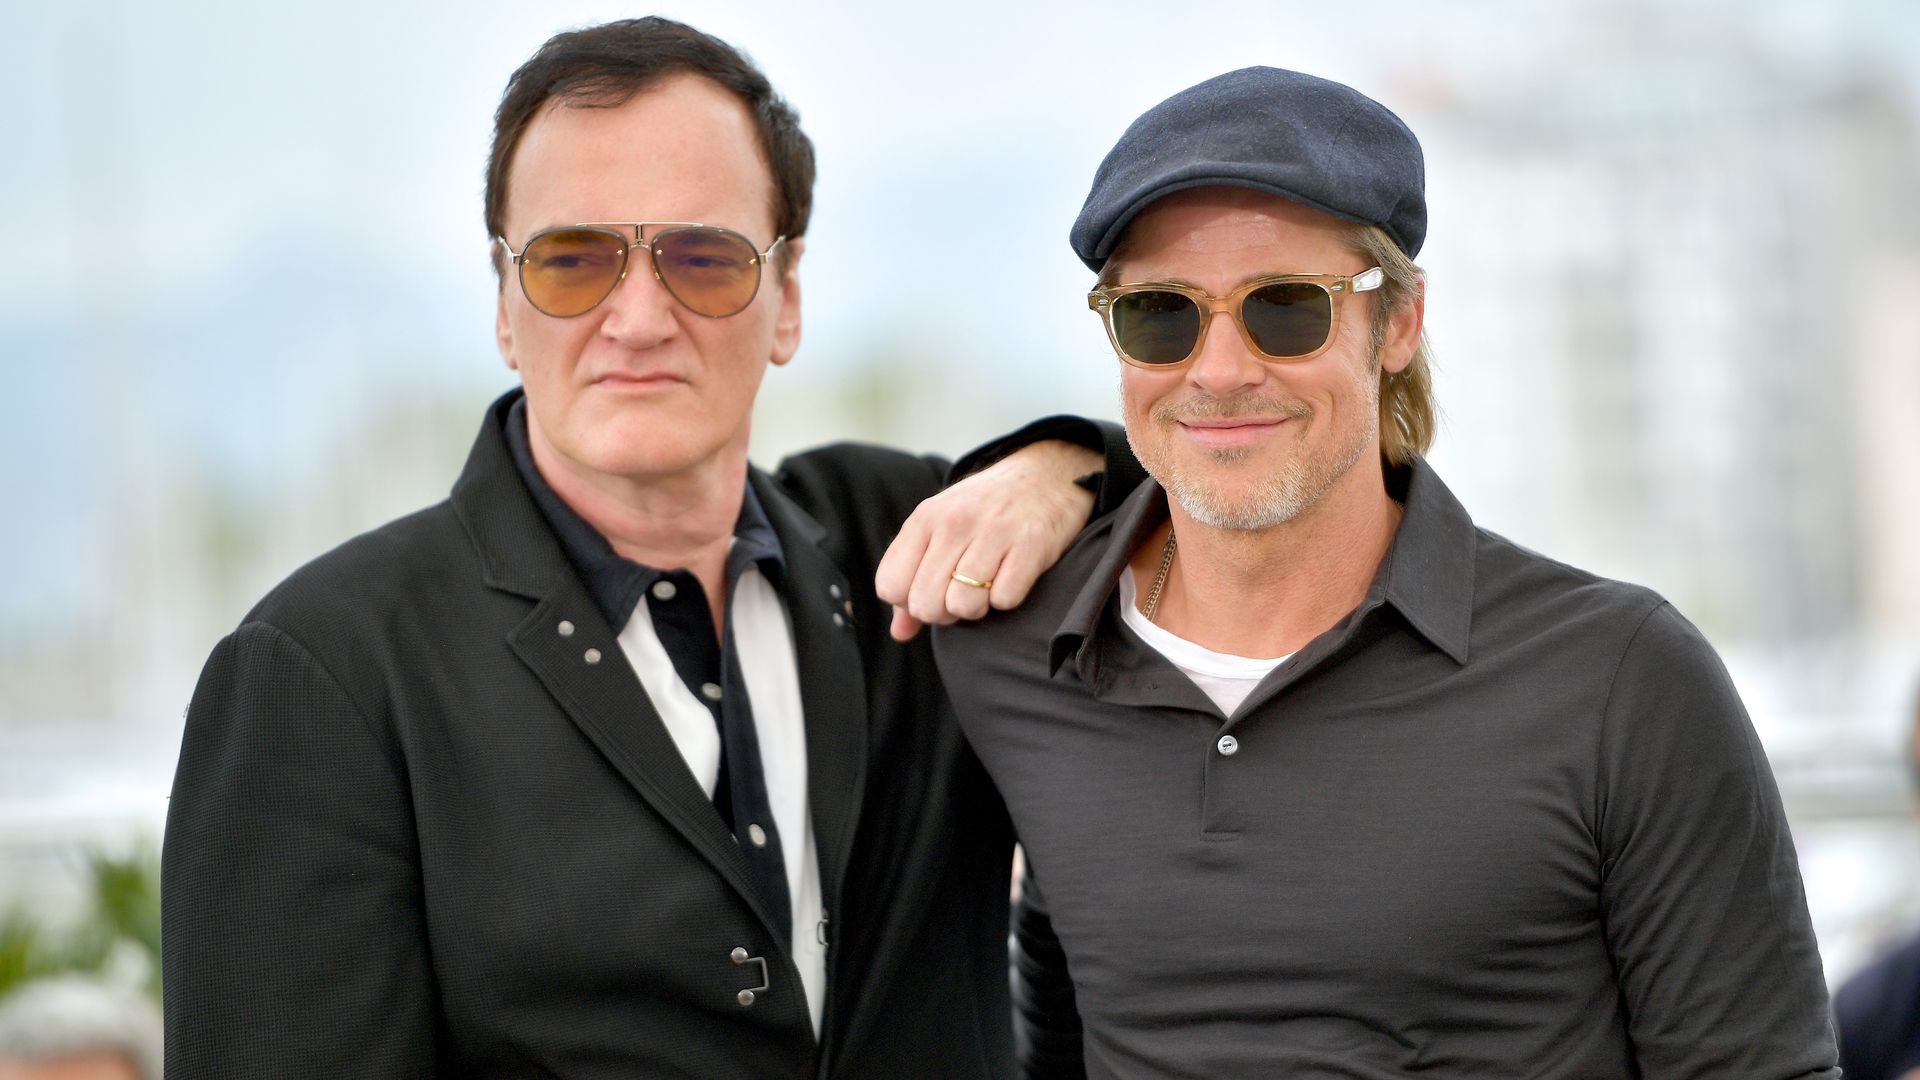 All we know about Quentin Tarantino’s final film, The Movie Critic, starring Brad Pitt